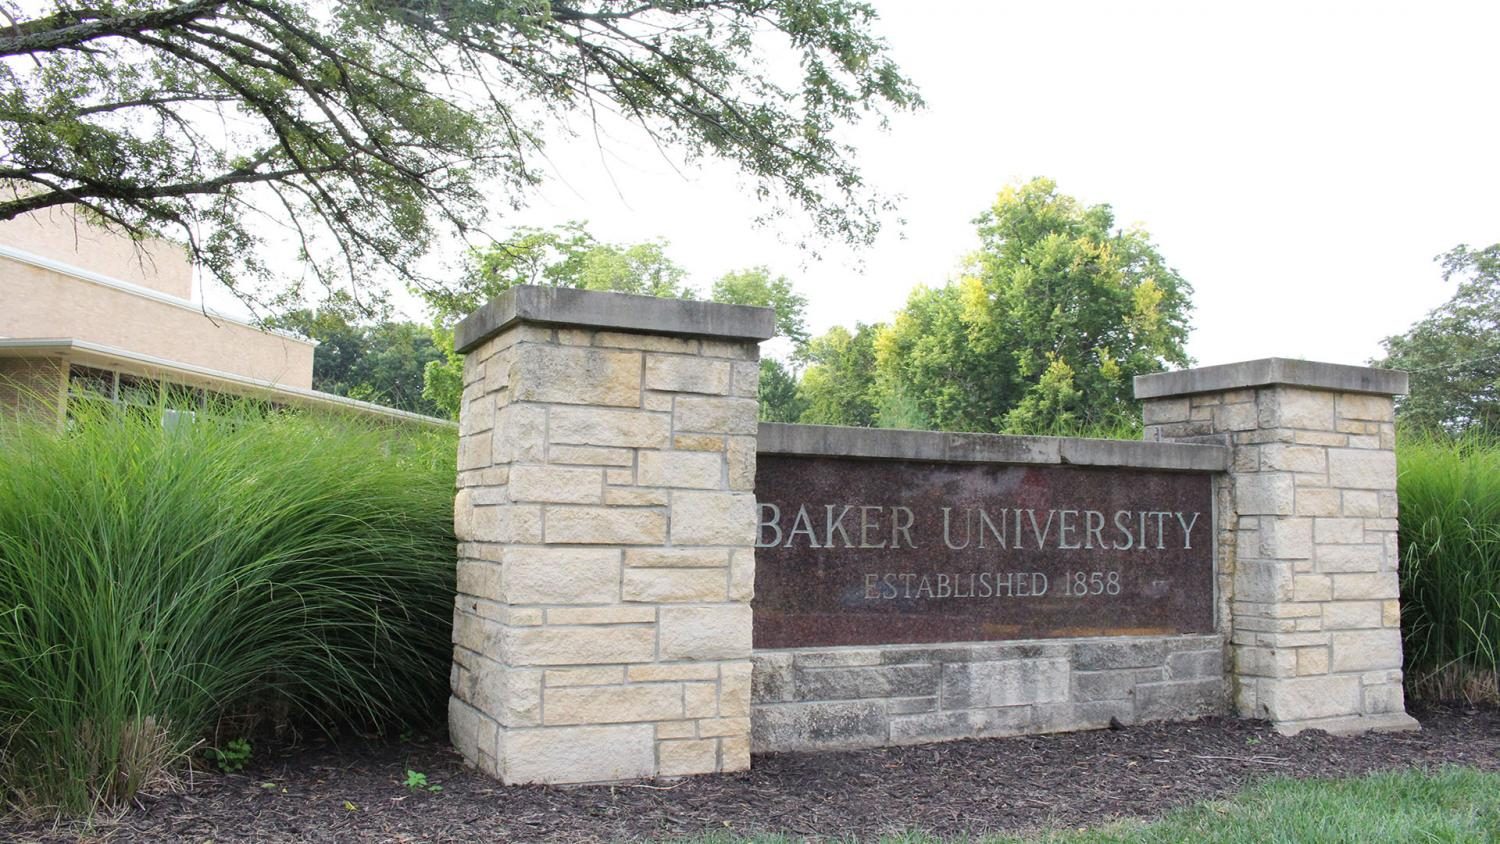 One of the signs welcoming people to Baker University.